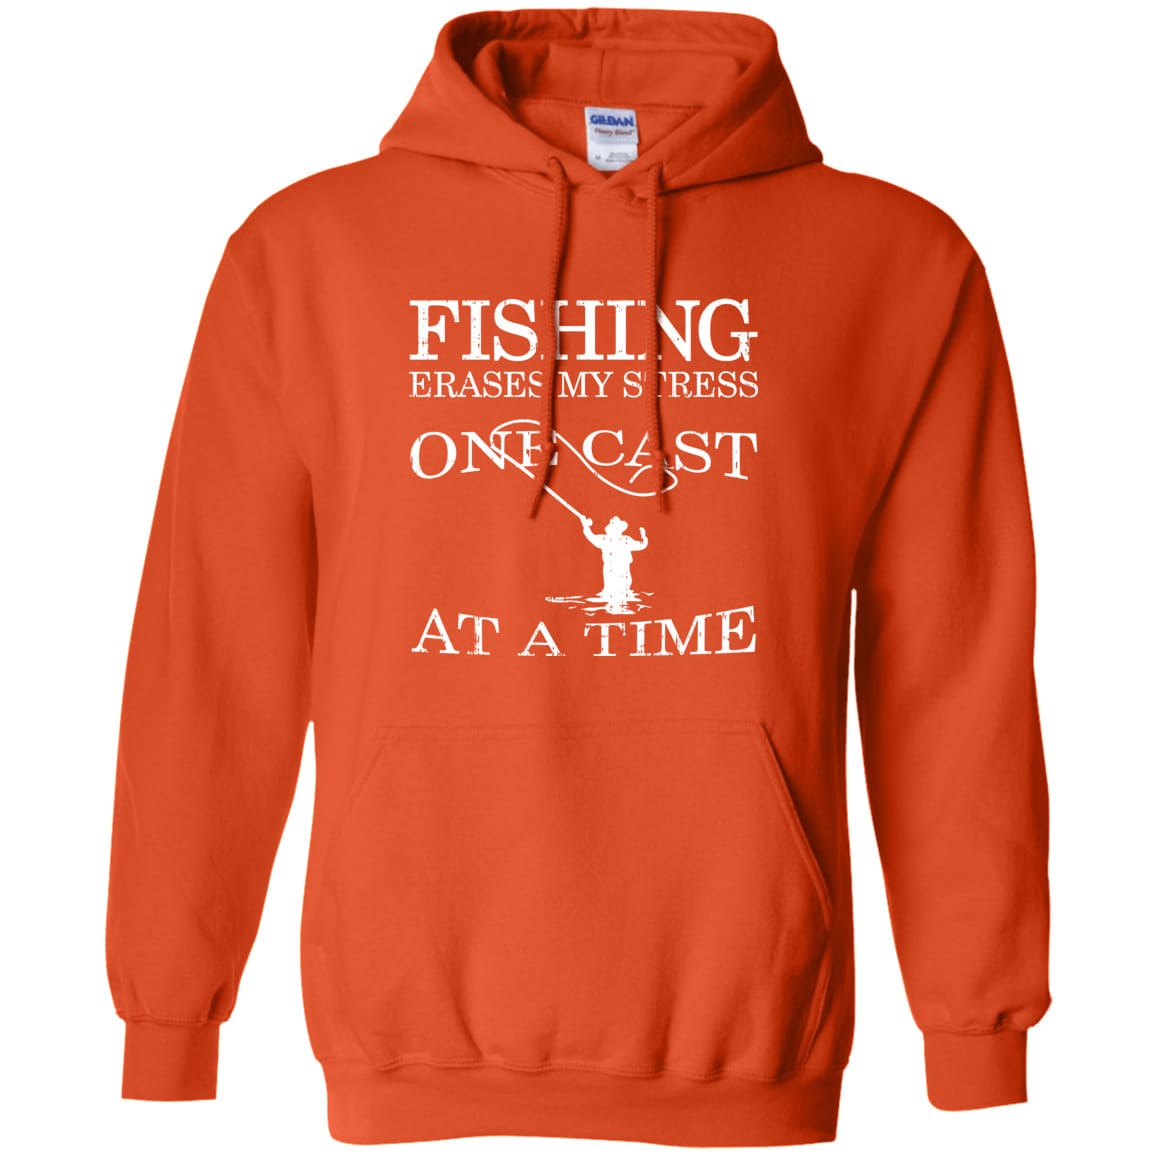 Fishing Erases My Stress Pullover Hoodie